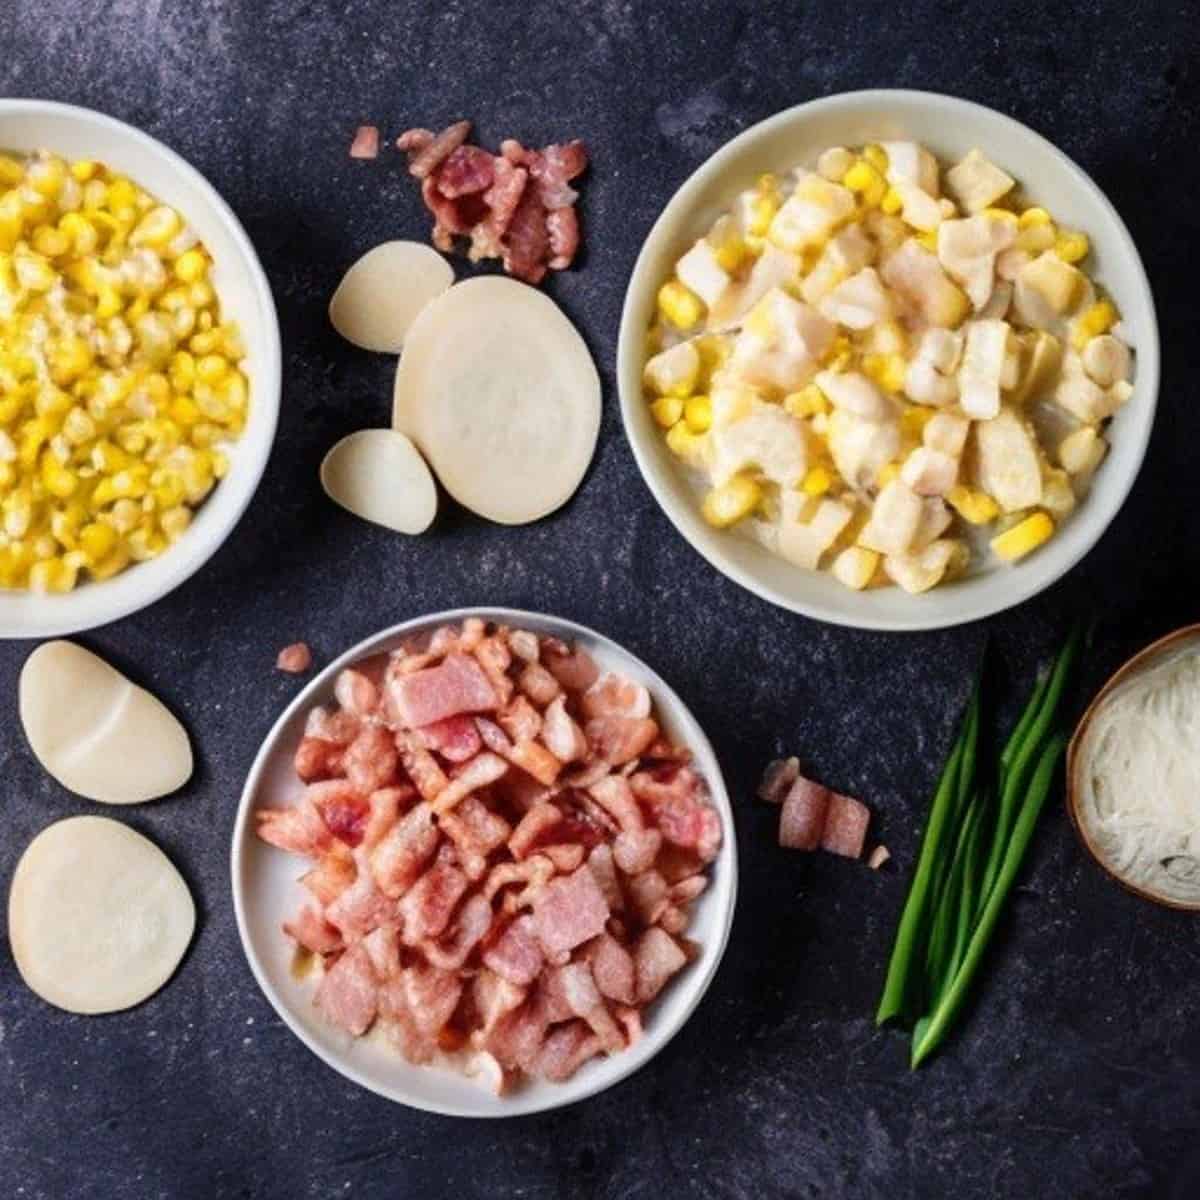 Ingredients needed to make potato and corn chowder soup recipe